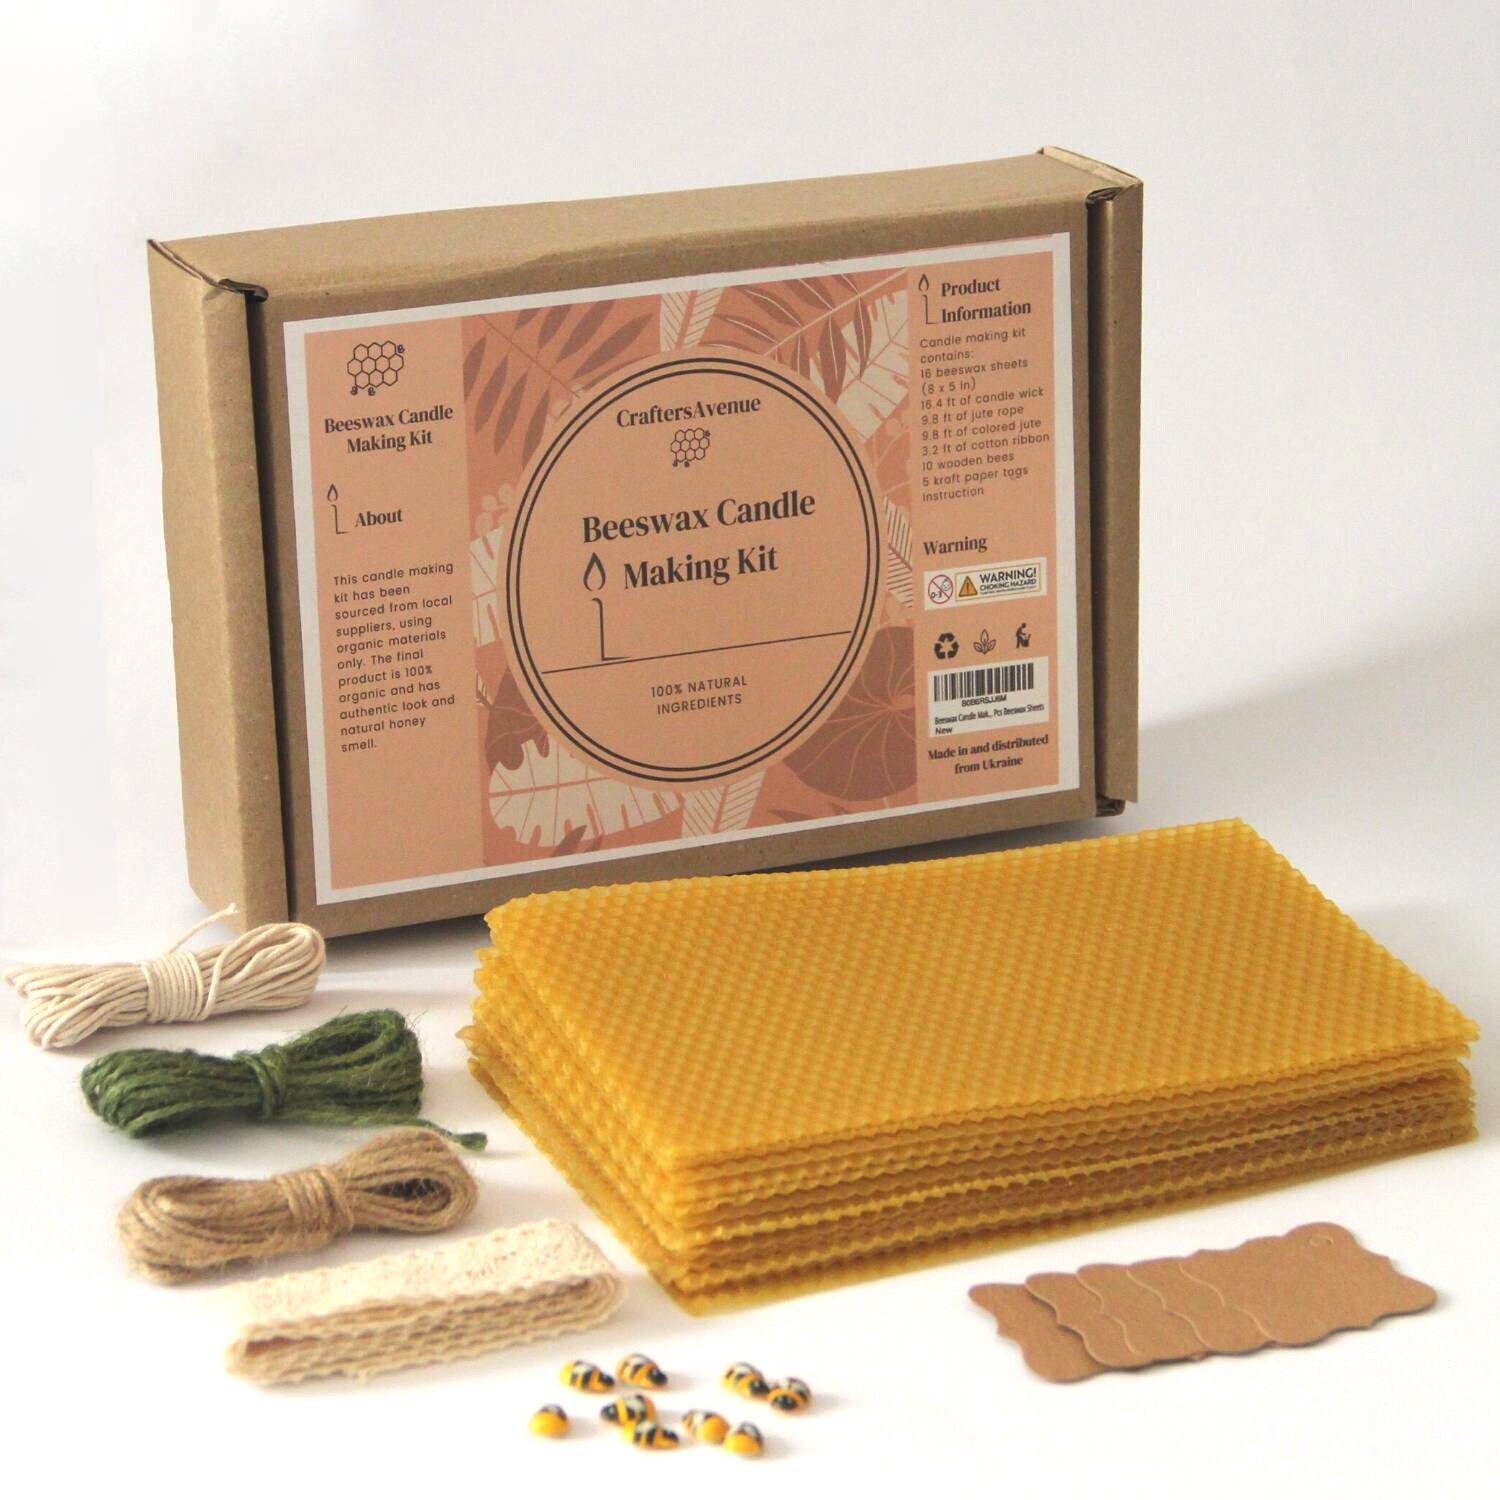 Beeswax Candle Making Kit - Great For Celebrations And Christmas - No Heat  Involved So Can Be Enjoyed With Children